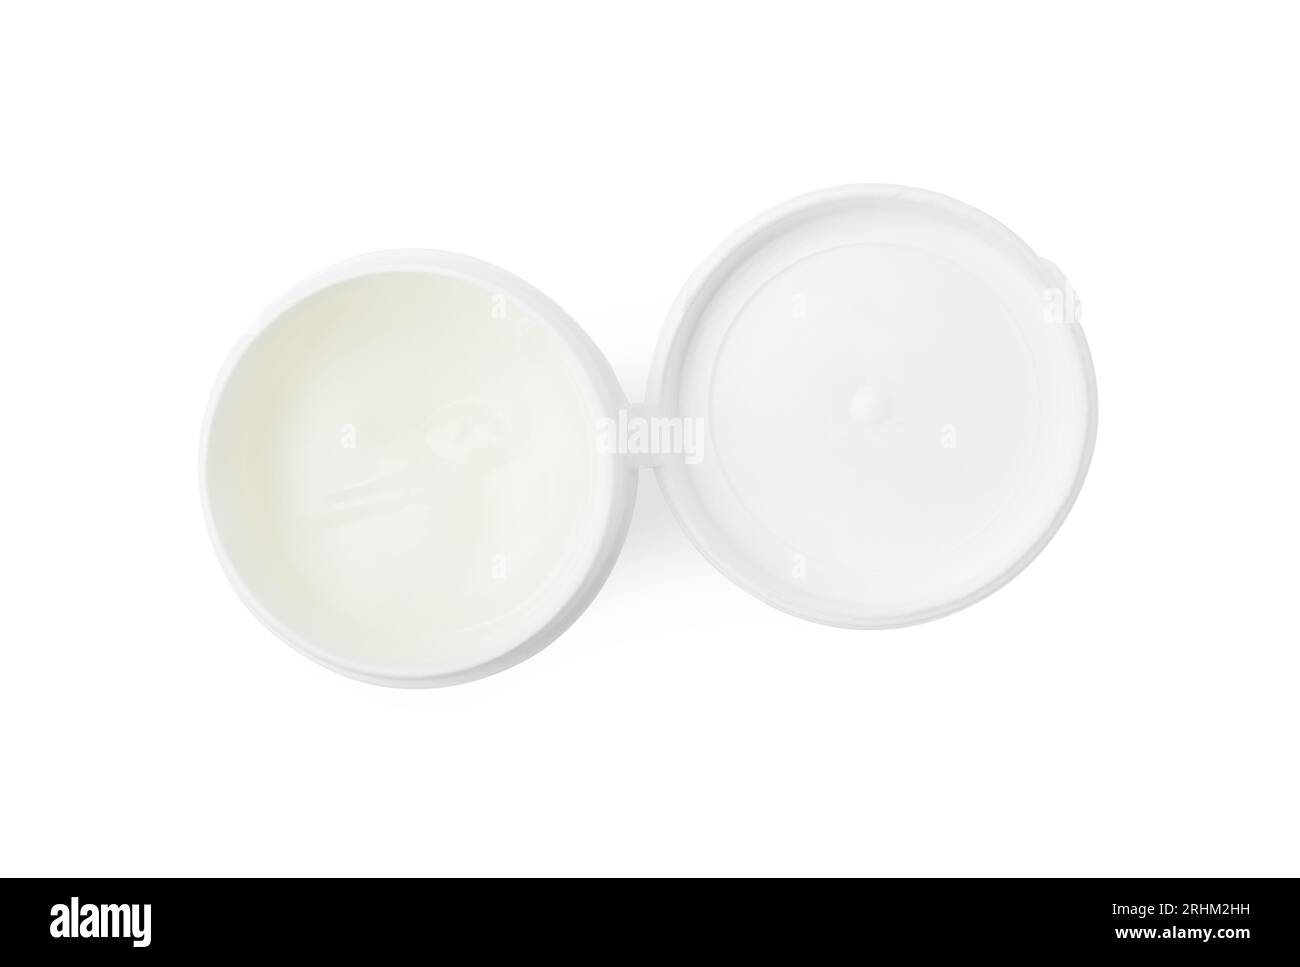 Jar of petroleum jelly on white background, top view Stock Photo